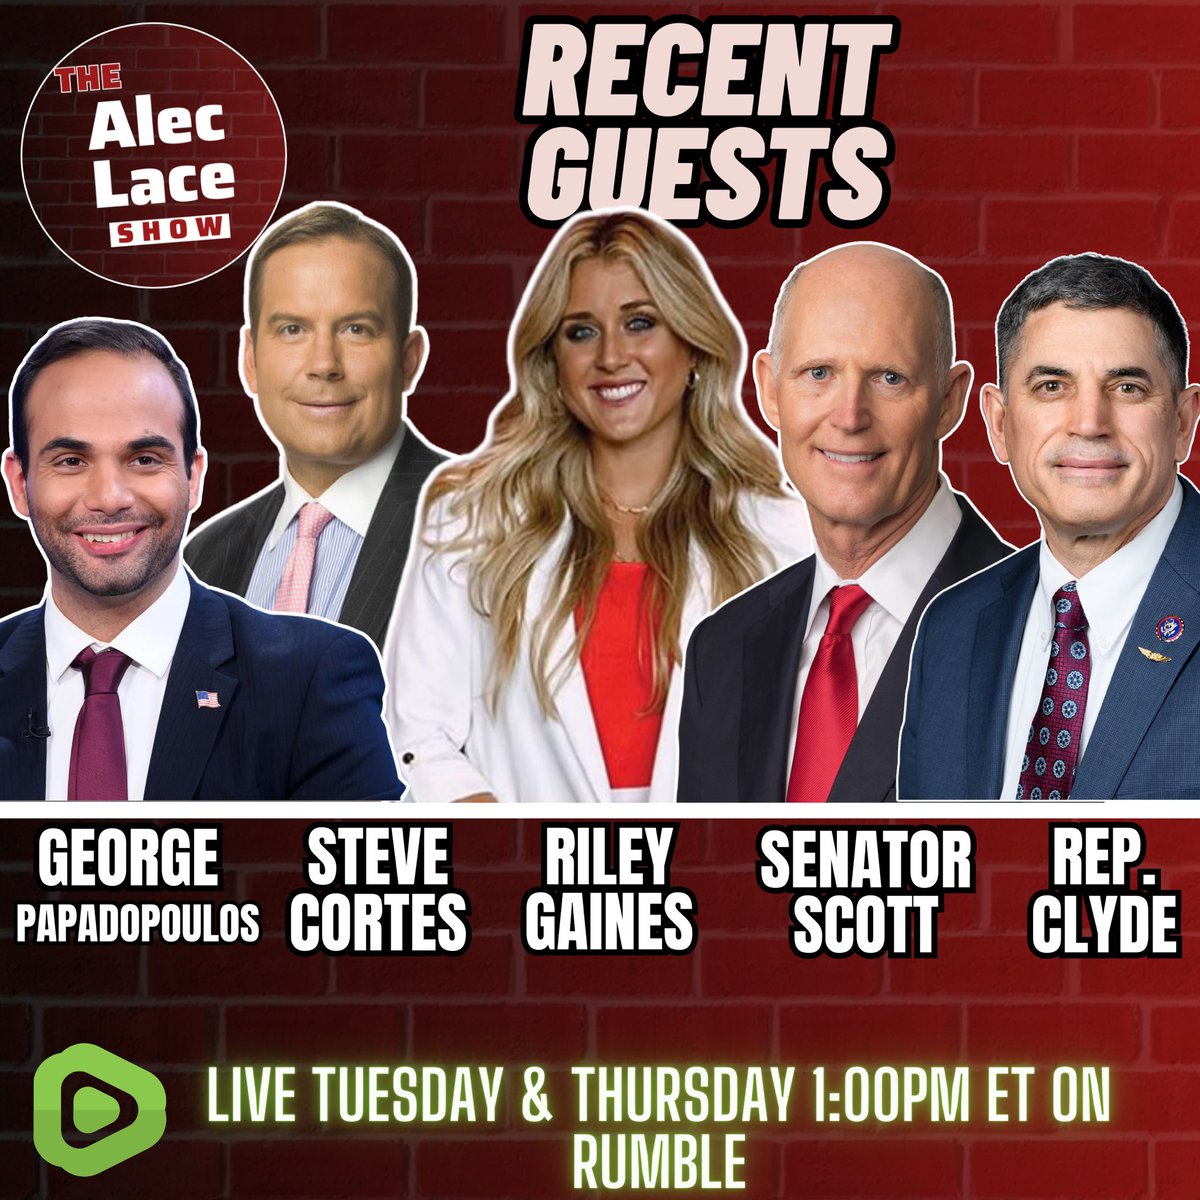 Checkout The Most Recent Guests to Join Me on The Alec Lace Show Riley Gaines @Riley_Gaines_ Senator Rick Scott @SenRickScott Rep. Andrew Clyde @Rep_Clyde Steve Cortes @CortesSteve George Papadopoulos @GeorgePapa19 New Episodes Stream Live on Free Speech Rumble every…